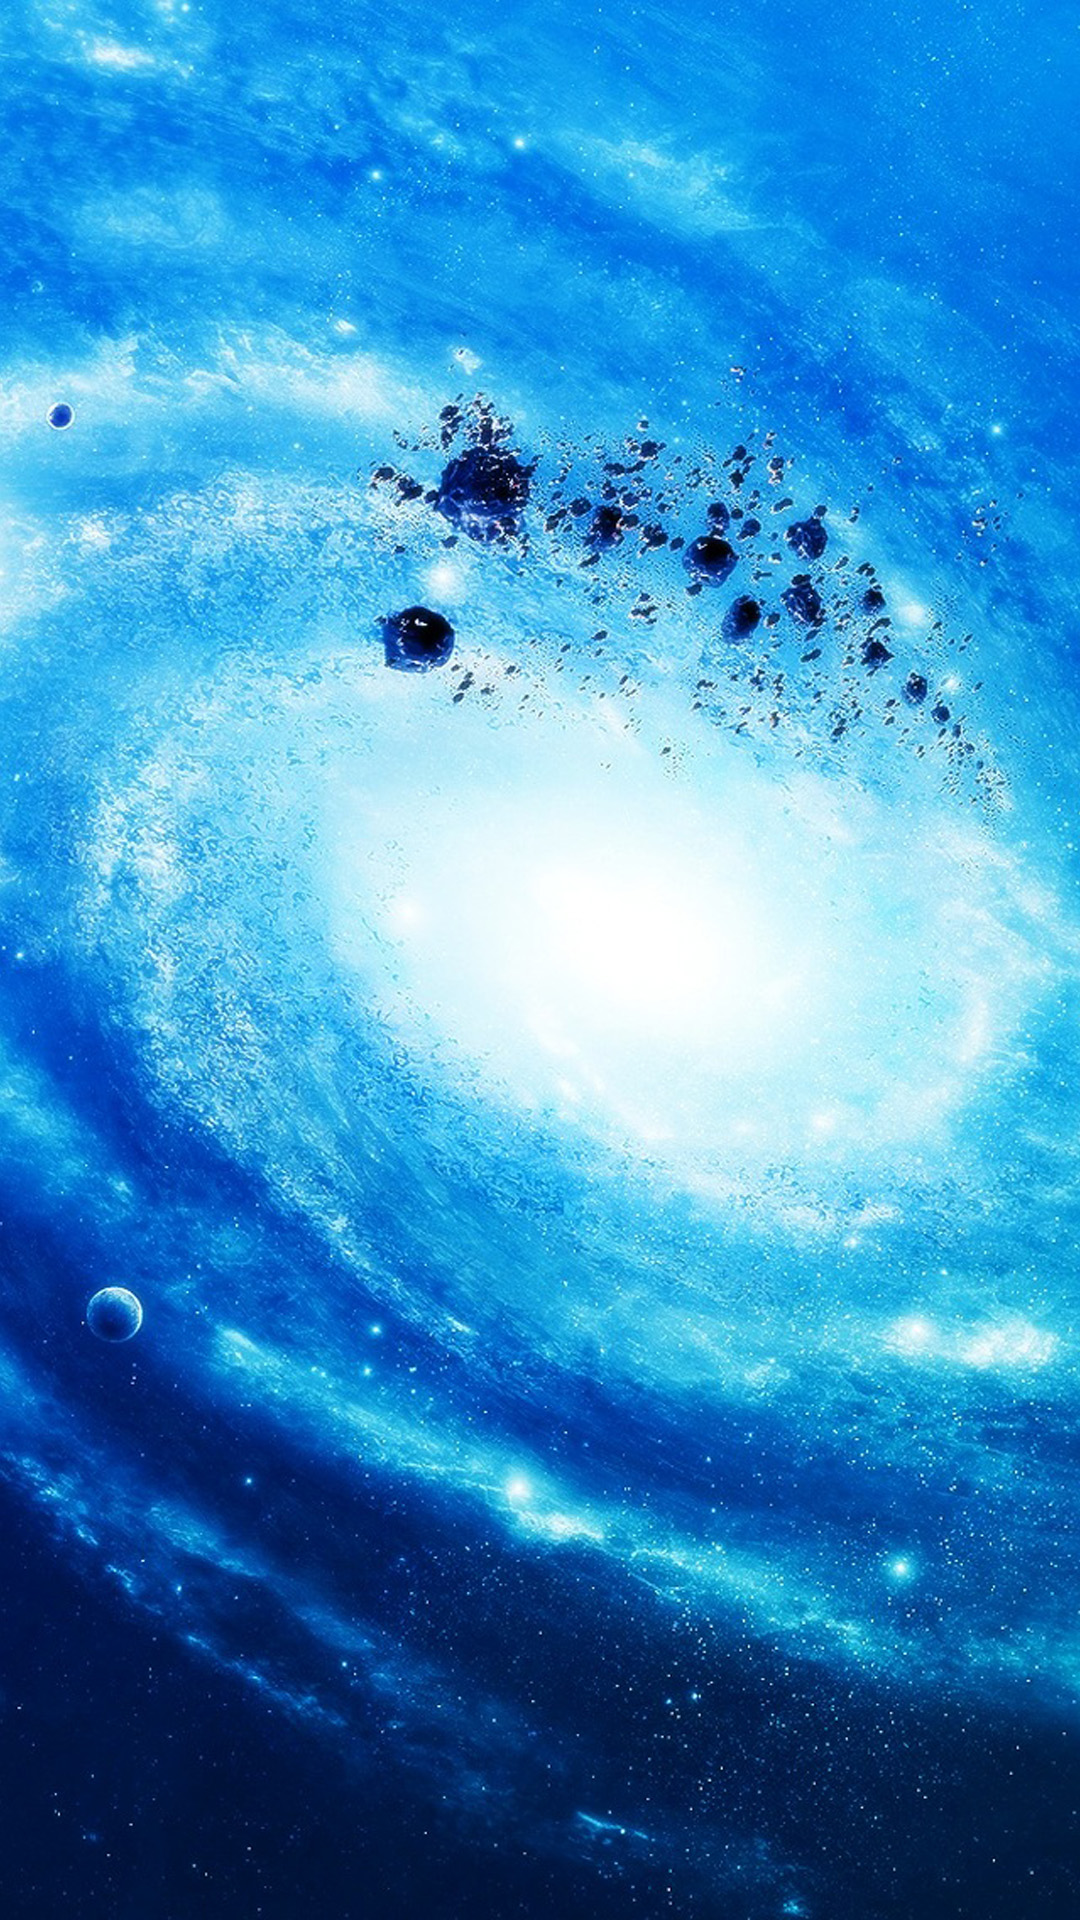 Silver Space Galaxy Android Wallpaper Green Galaxy Outer Space 1080x1920 Wallpaper Teahub Io